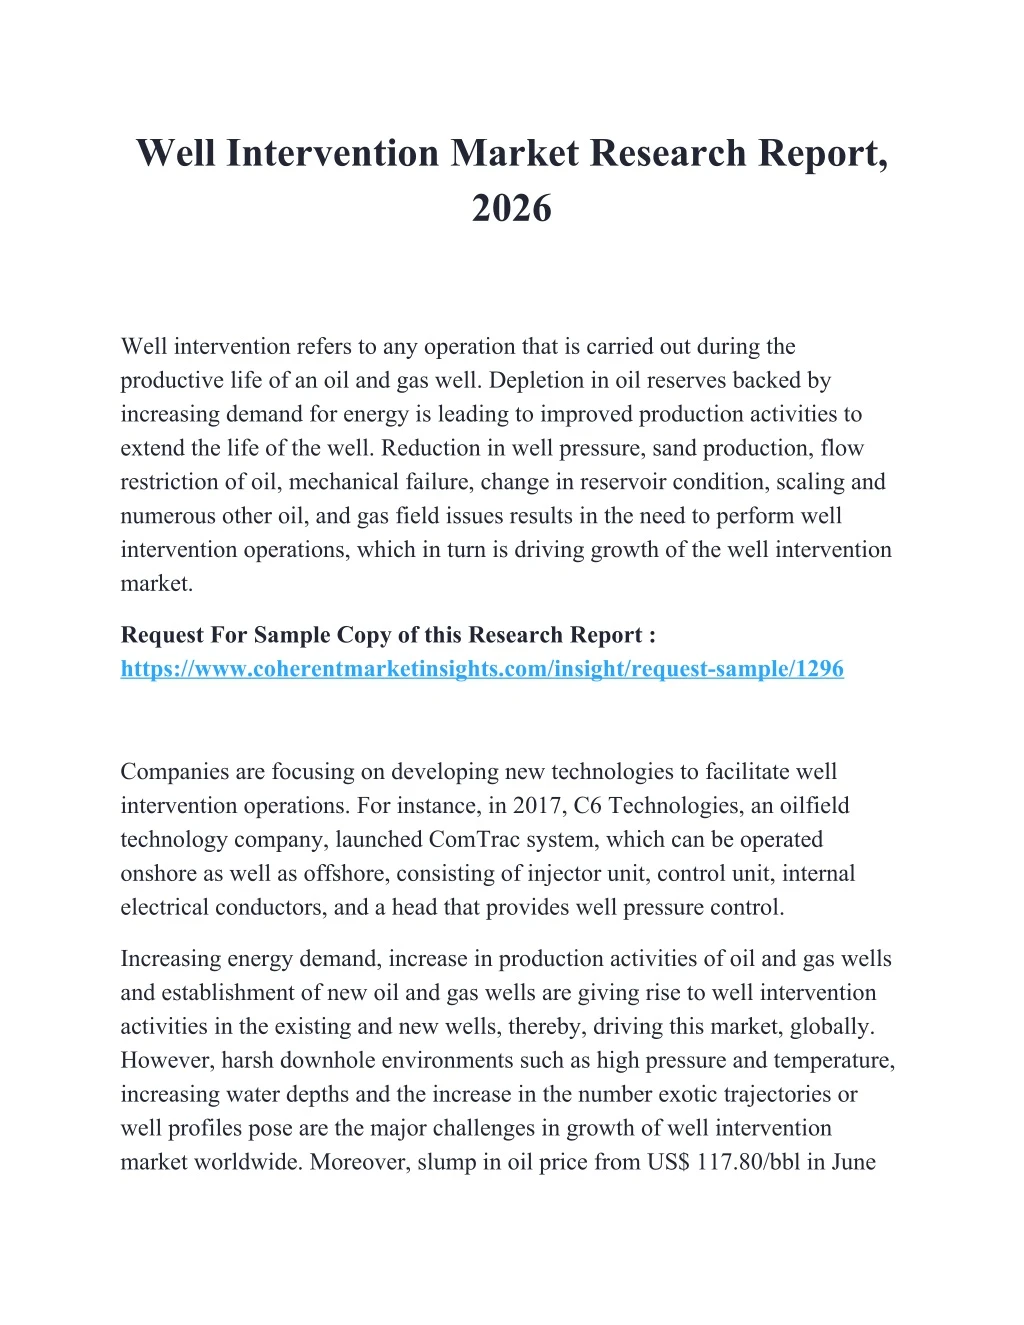 well intervention market research report 2026